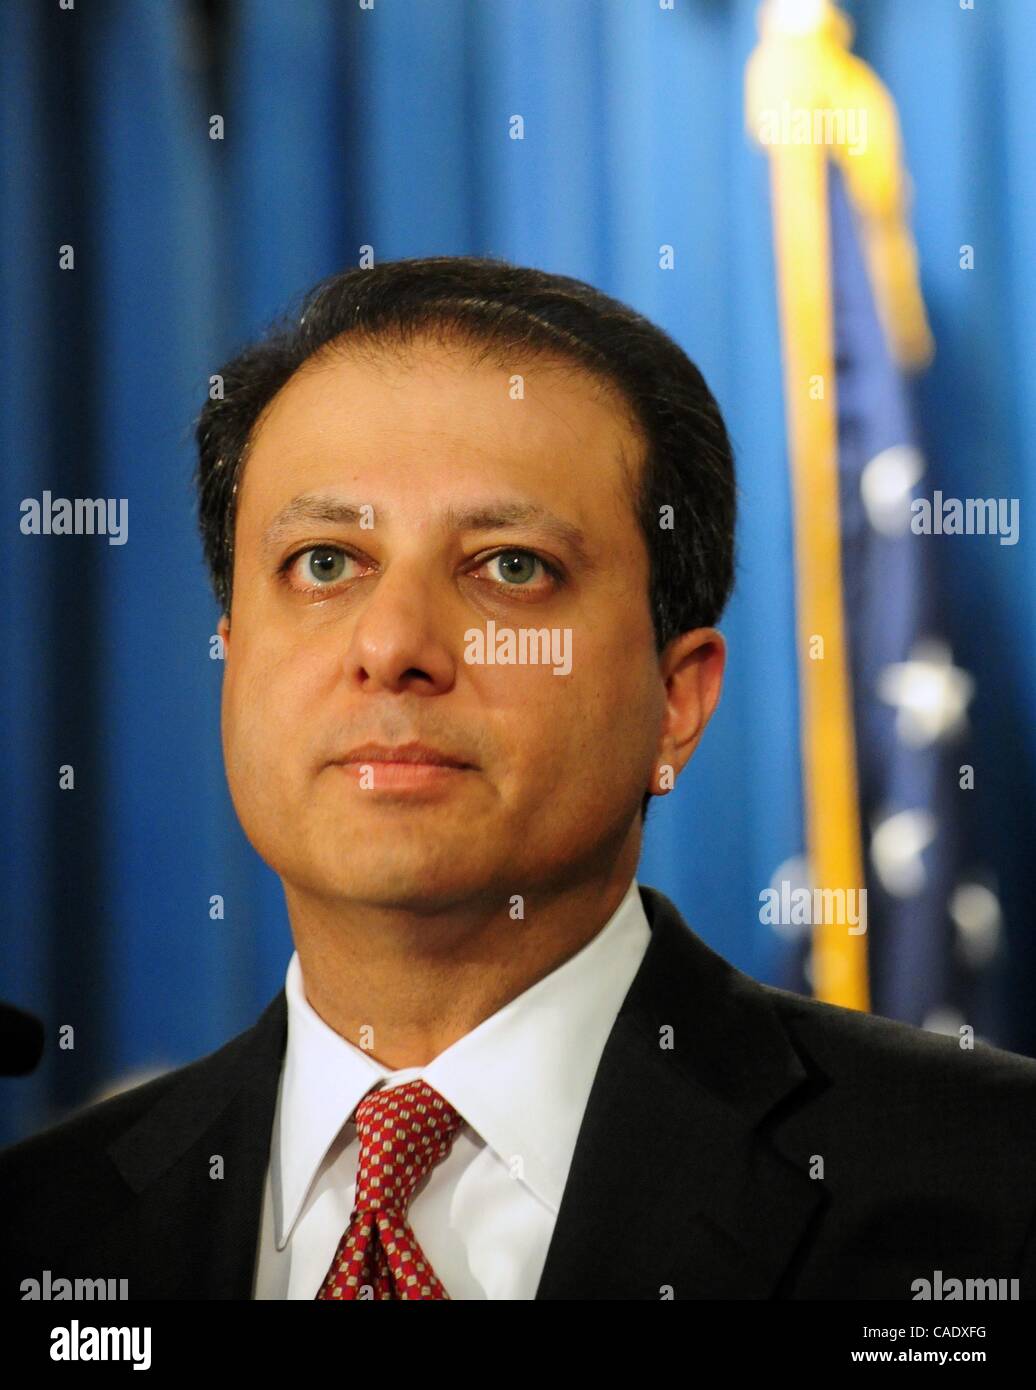 Aug. 10, 2010 - Manhattan, New York, U.S. - United State Attorney for the Southern District of New York PREET BHARARA announces the unsealing of federal charges against 11 defendants for allegedly operating a fraud and bribery scheme through which they obtained millions of dollars in public funds in Stock Photo